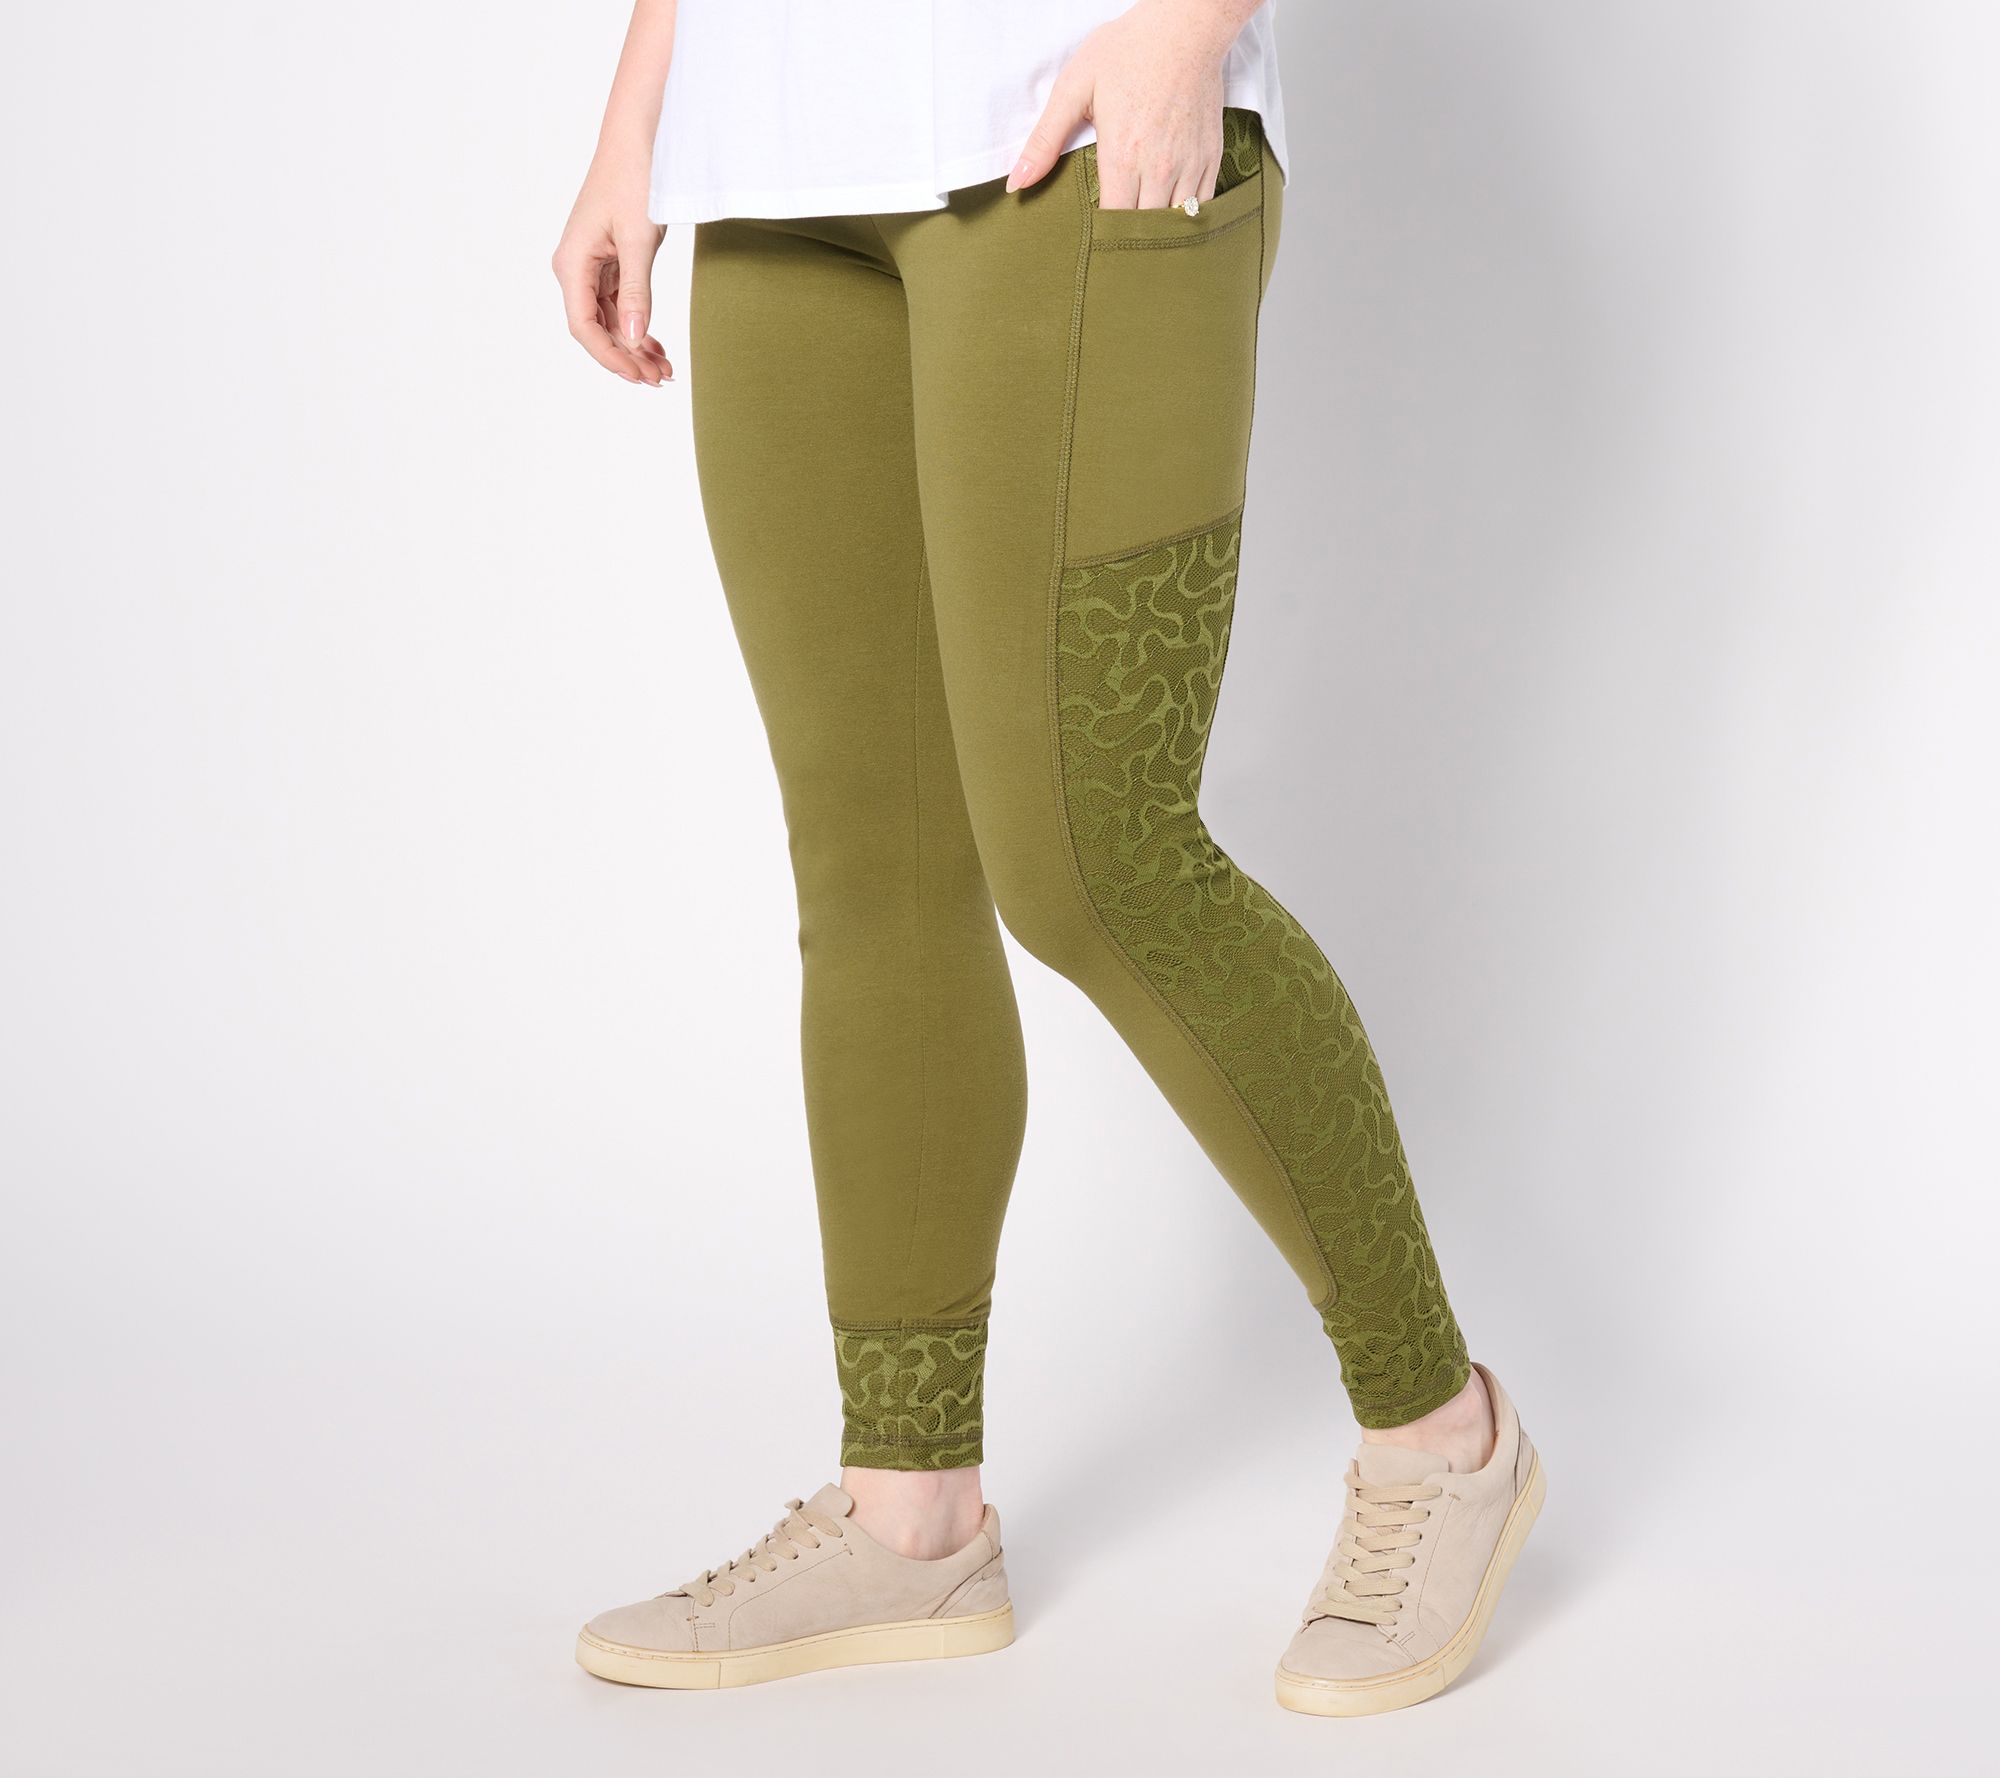 Tolani Collection Printed Leggings with Side Pockets